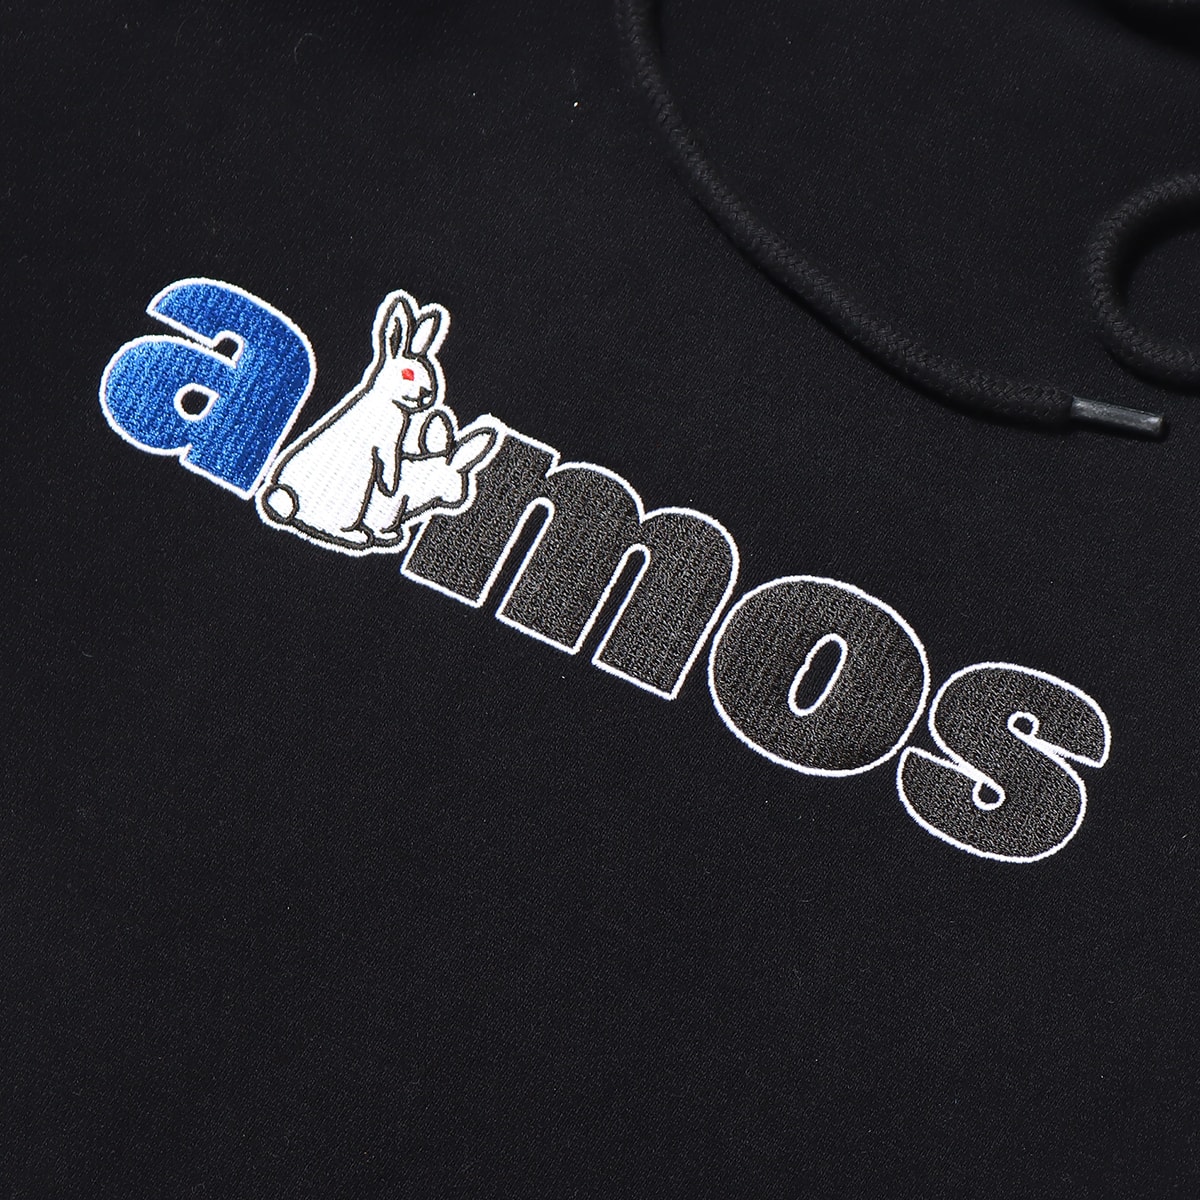 FR2 #FR2DOKO collaboration with atmos Hoodie ブラック